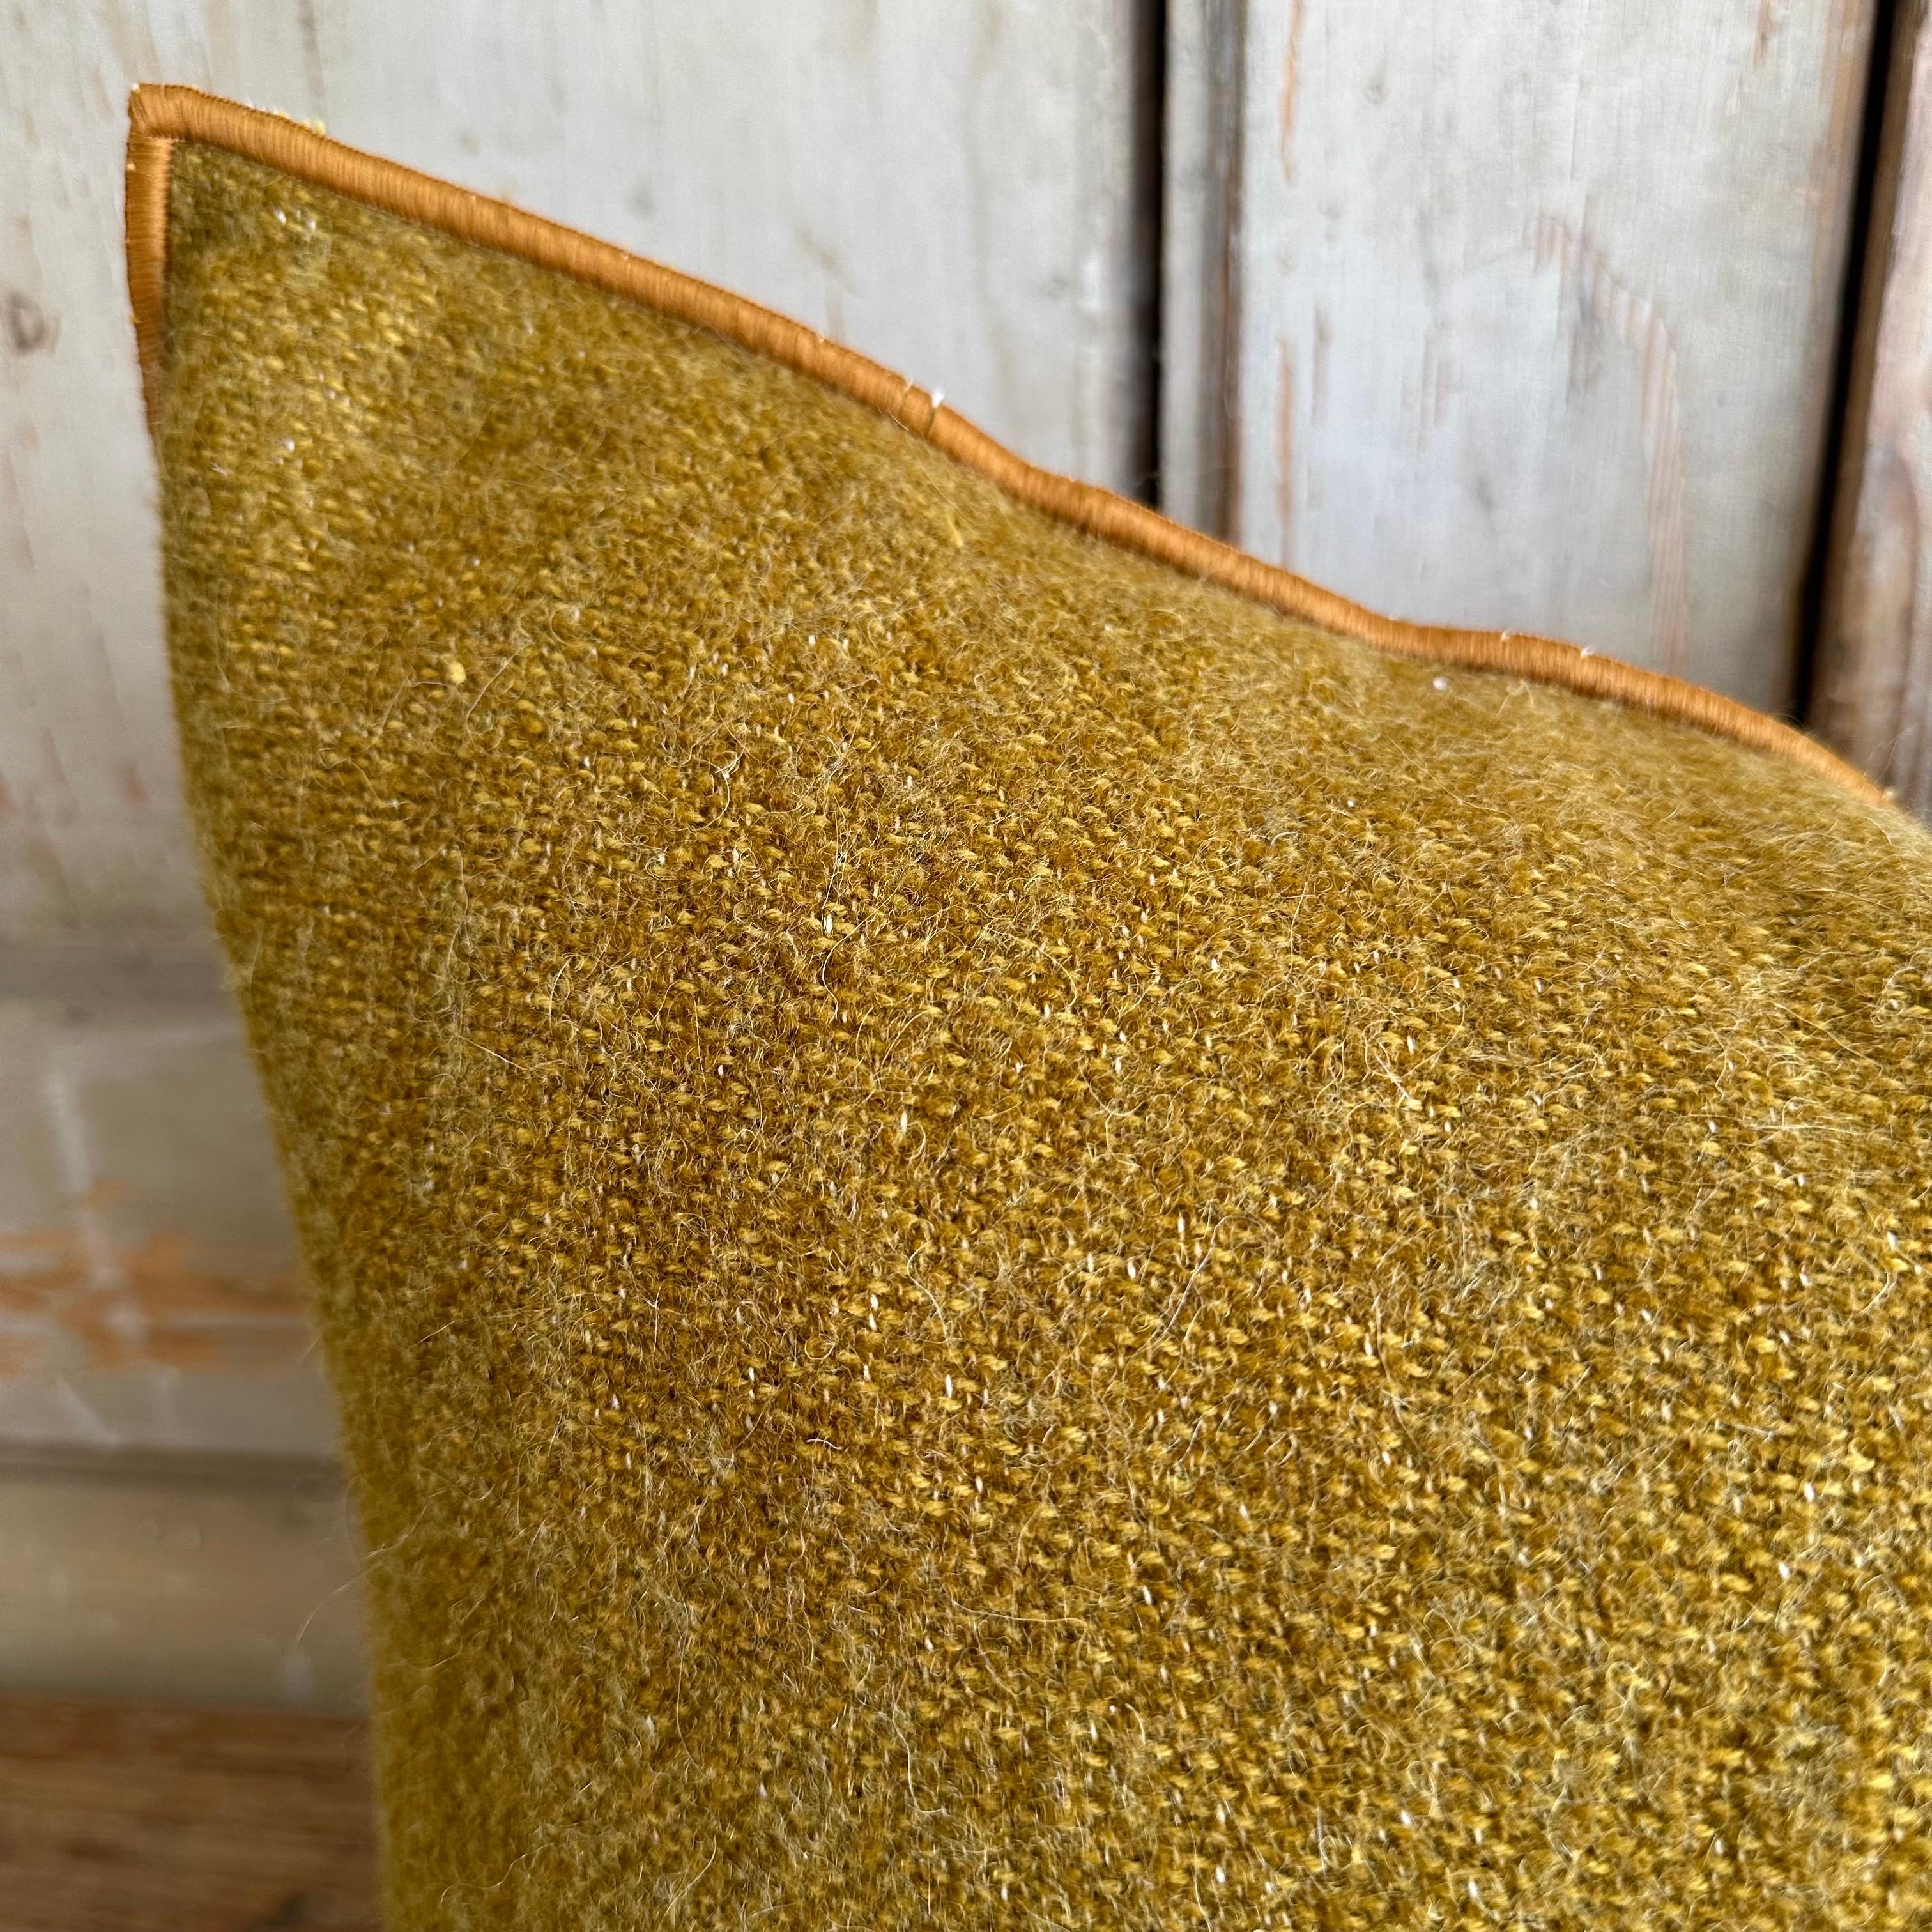 Custom wool blend accent pillow with down insert. 
Color: Ocre ; a mustard with warm brown tone colored nubby boucle style pillow with a stitched edge, metal zipper closure. 
Size: 14”x23”.
Our pillows are constructed with vintage one of a kind